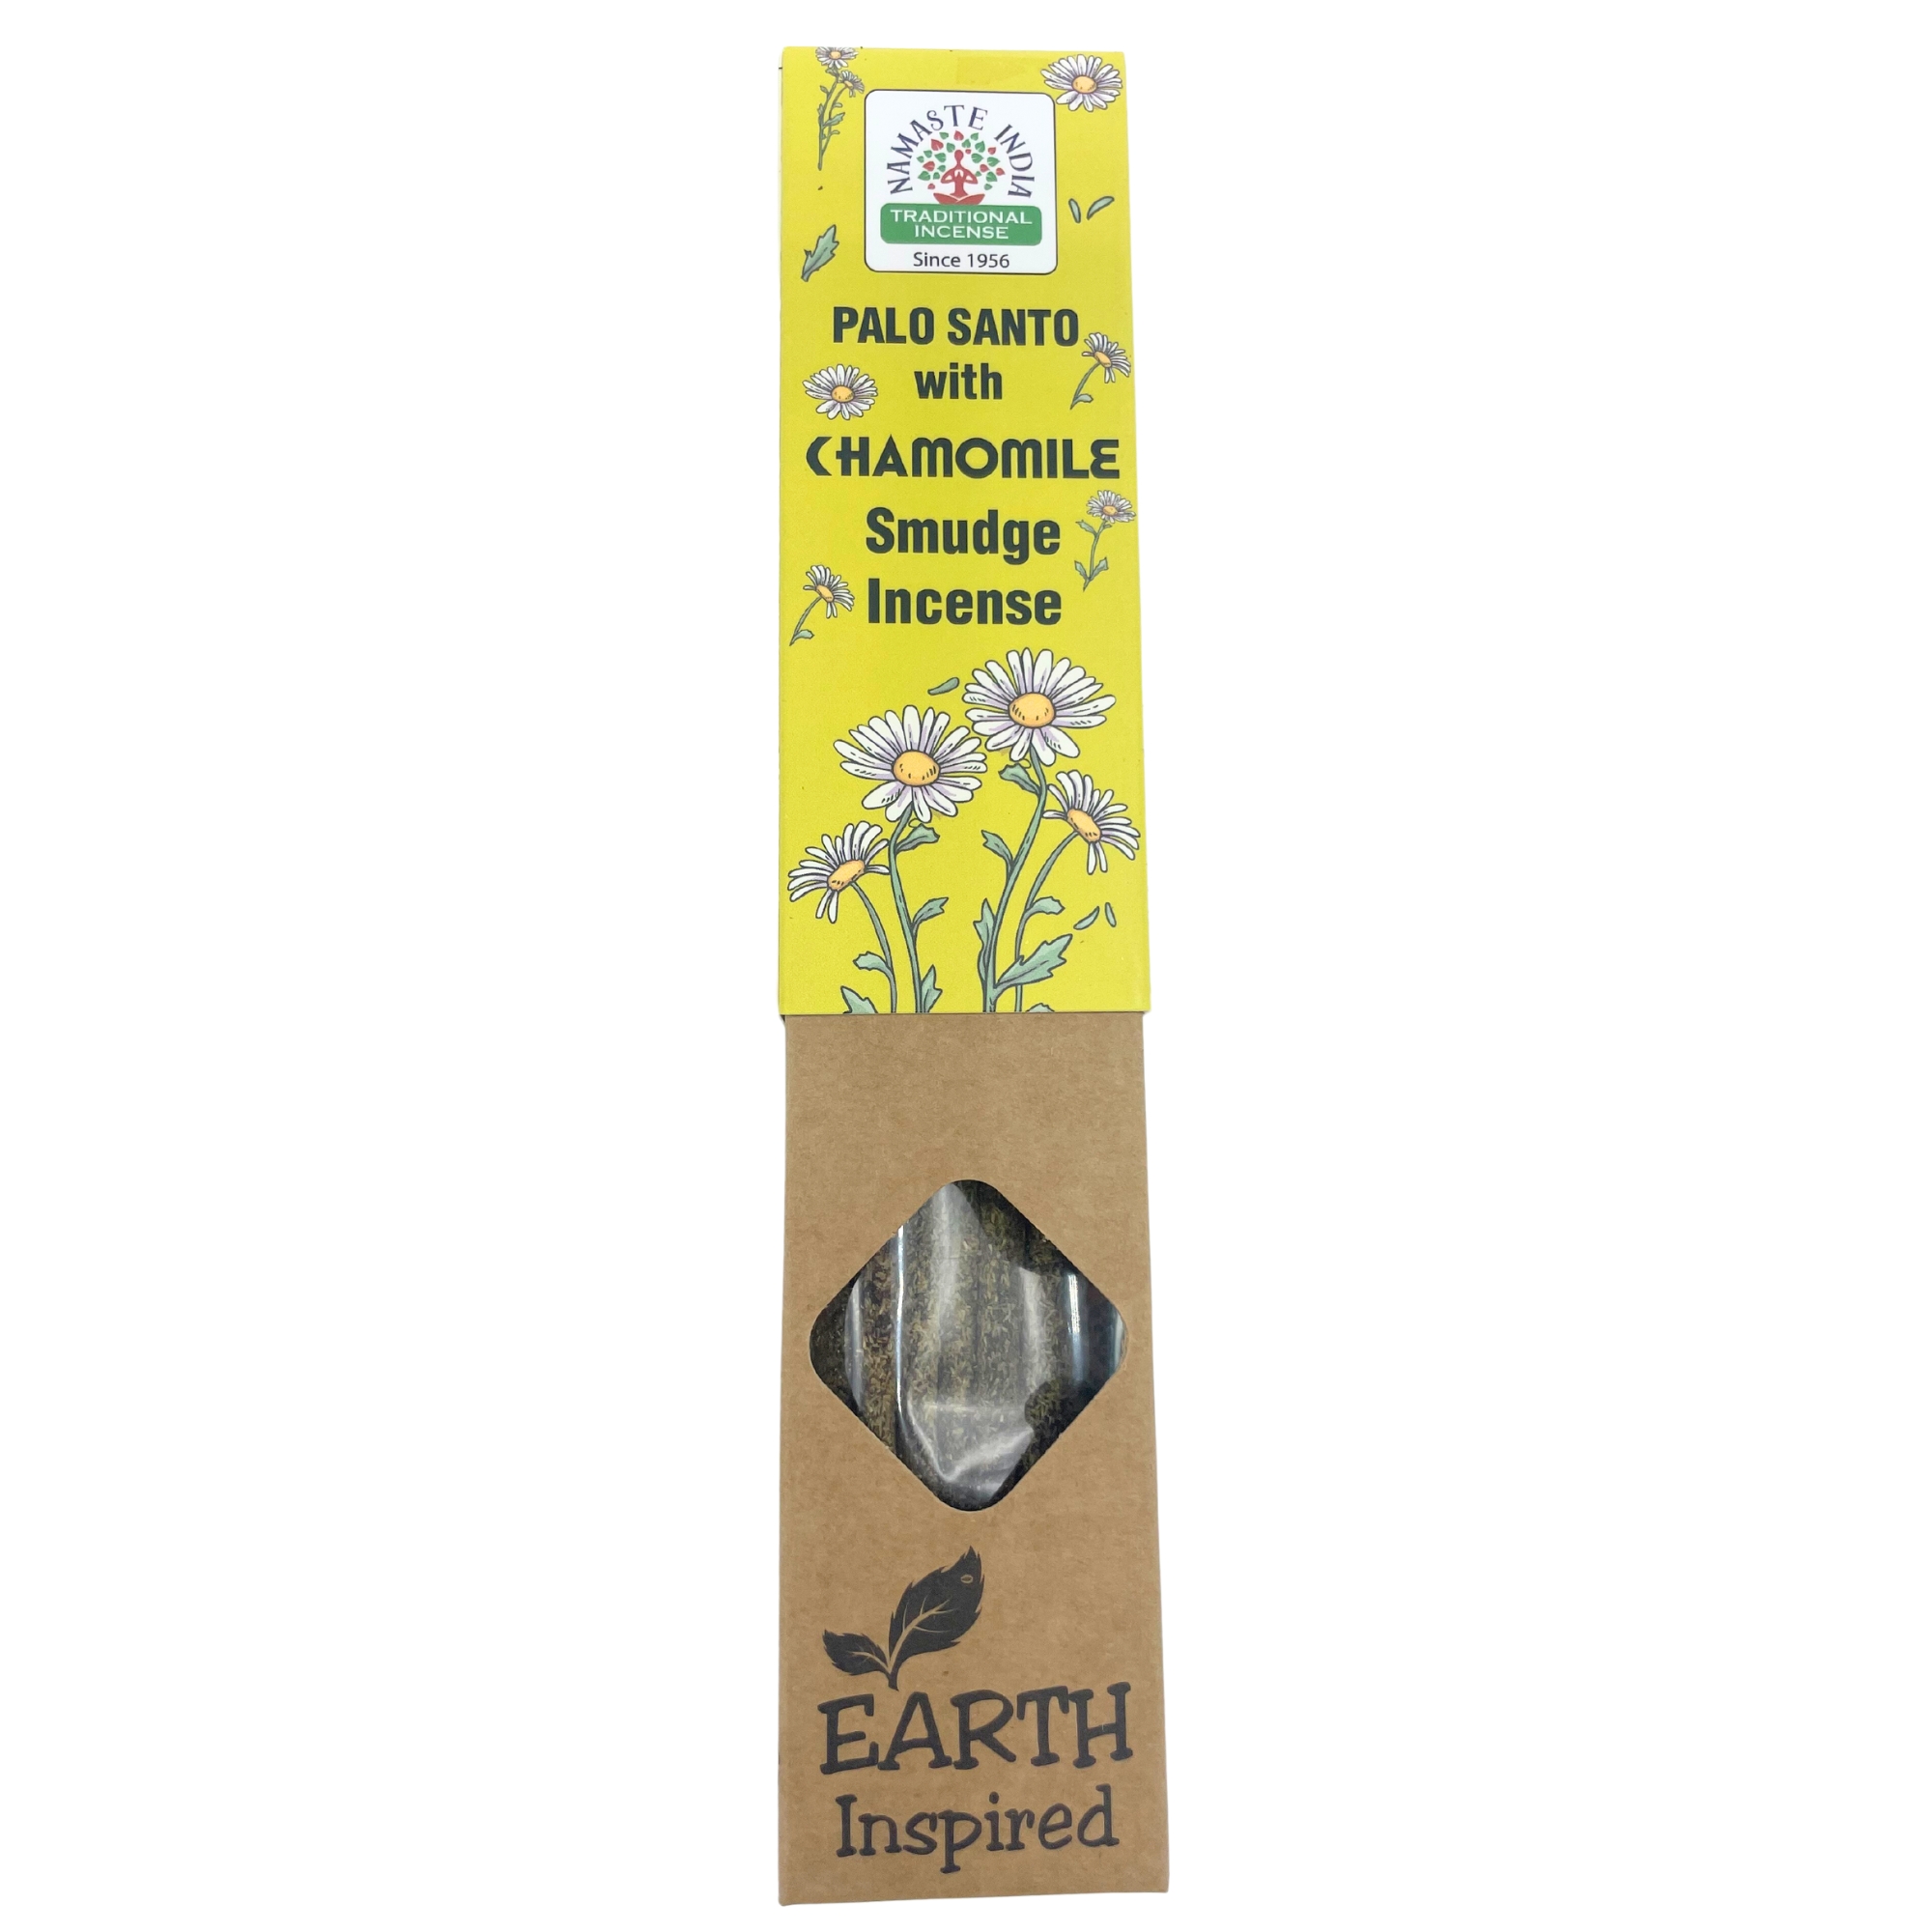 Earth Inspired Smudge Incense - Chamomile